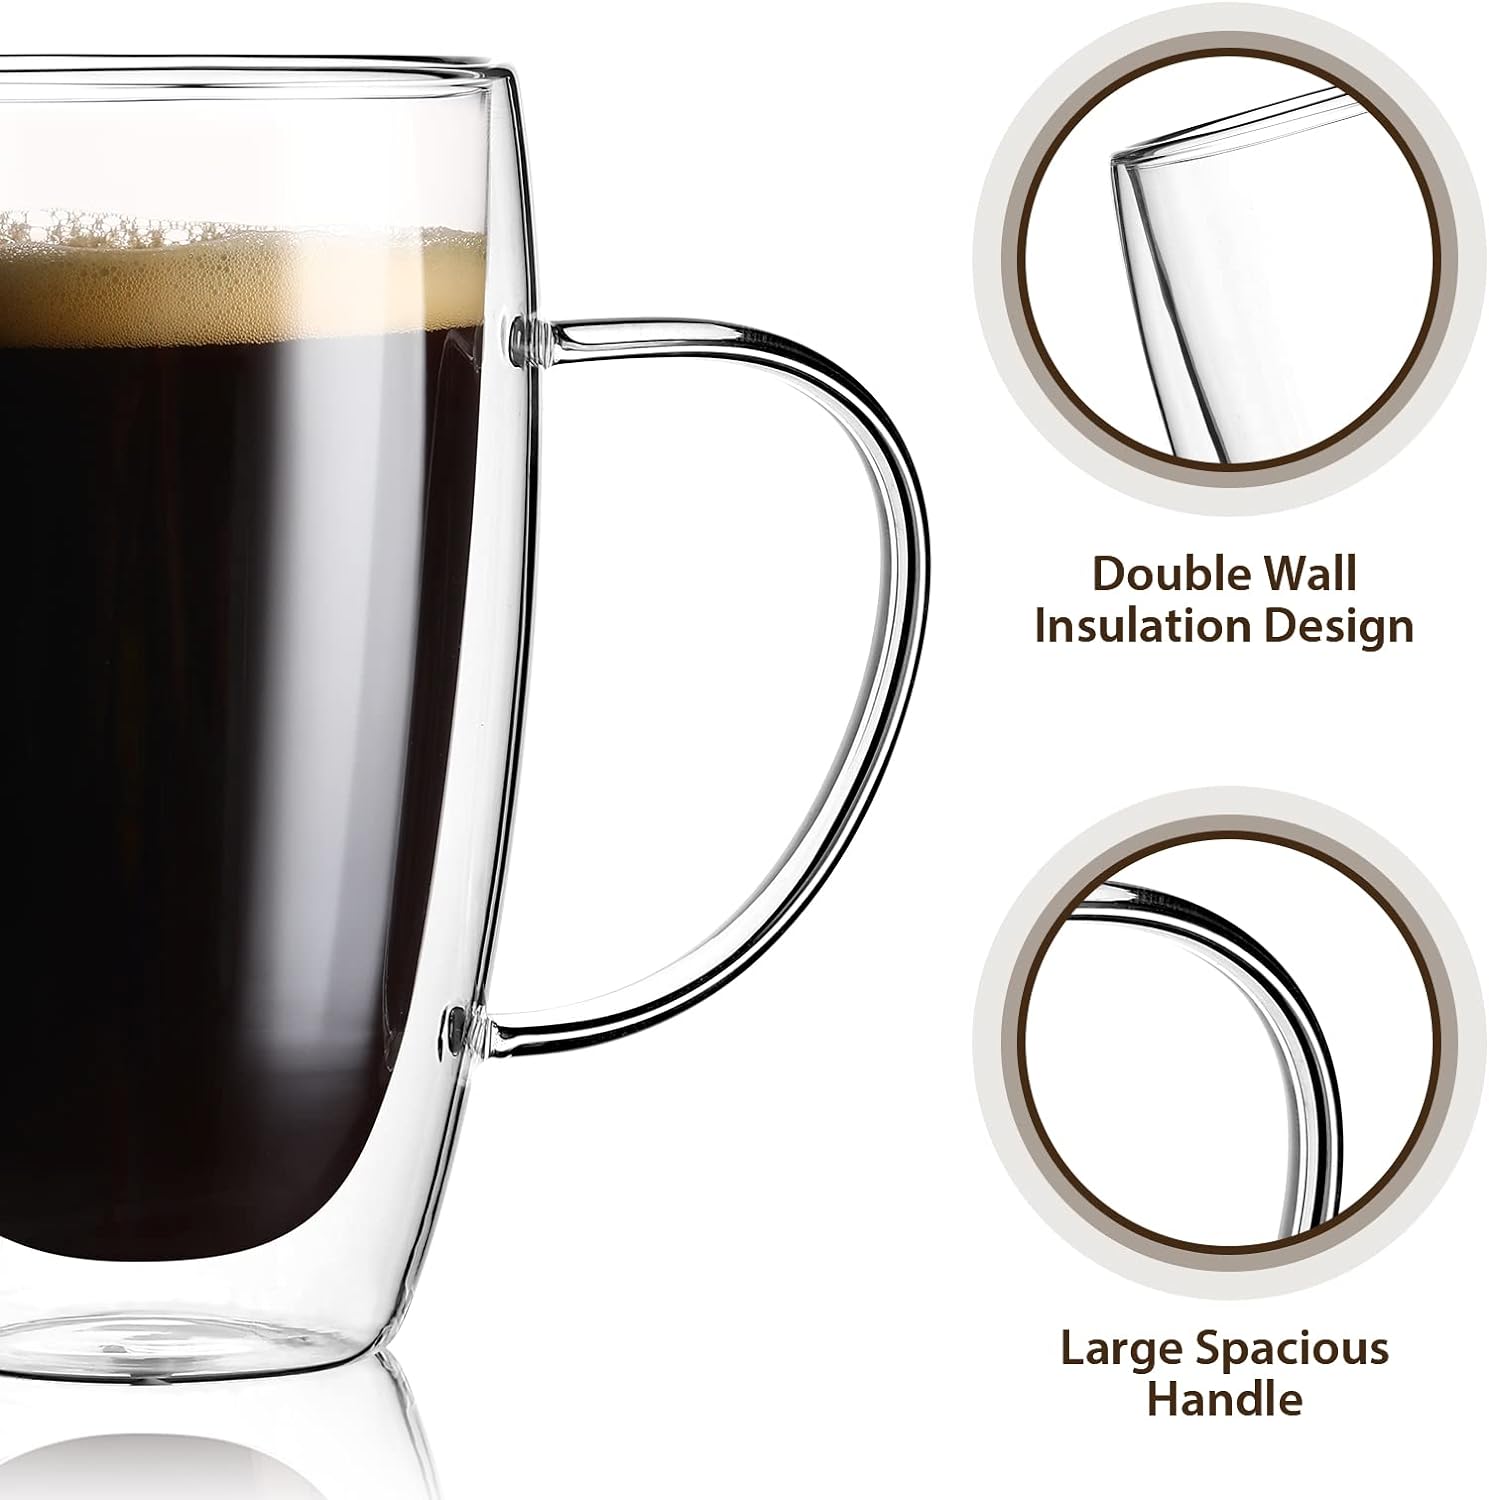 12 Oz Double Walled Glass Coffee Mugs with Handle Set of 2,Insulated Layer Coffee Cups,Clear Borosilicate Glass Mugs,Christmas Gift for Cappuccino,Tea,Latte,Espresso,Hot Beverage,Wine